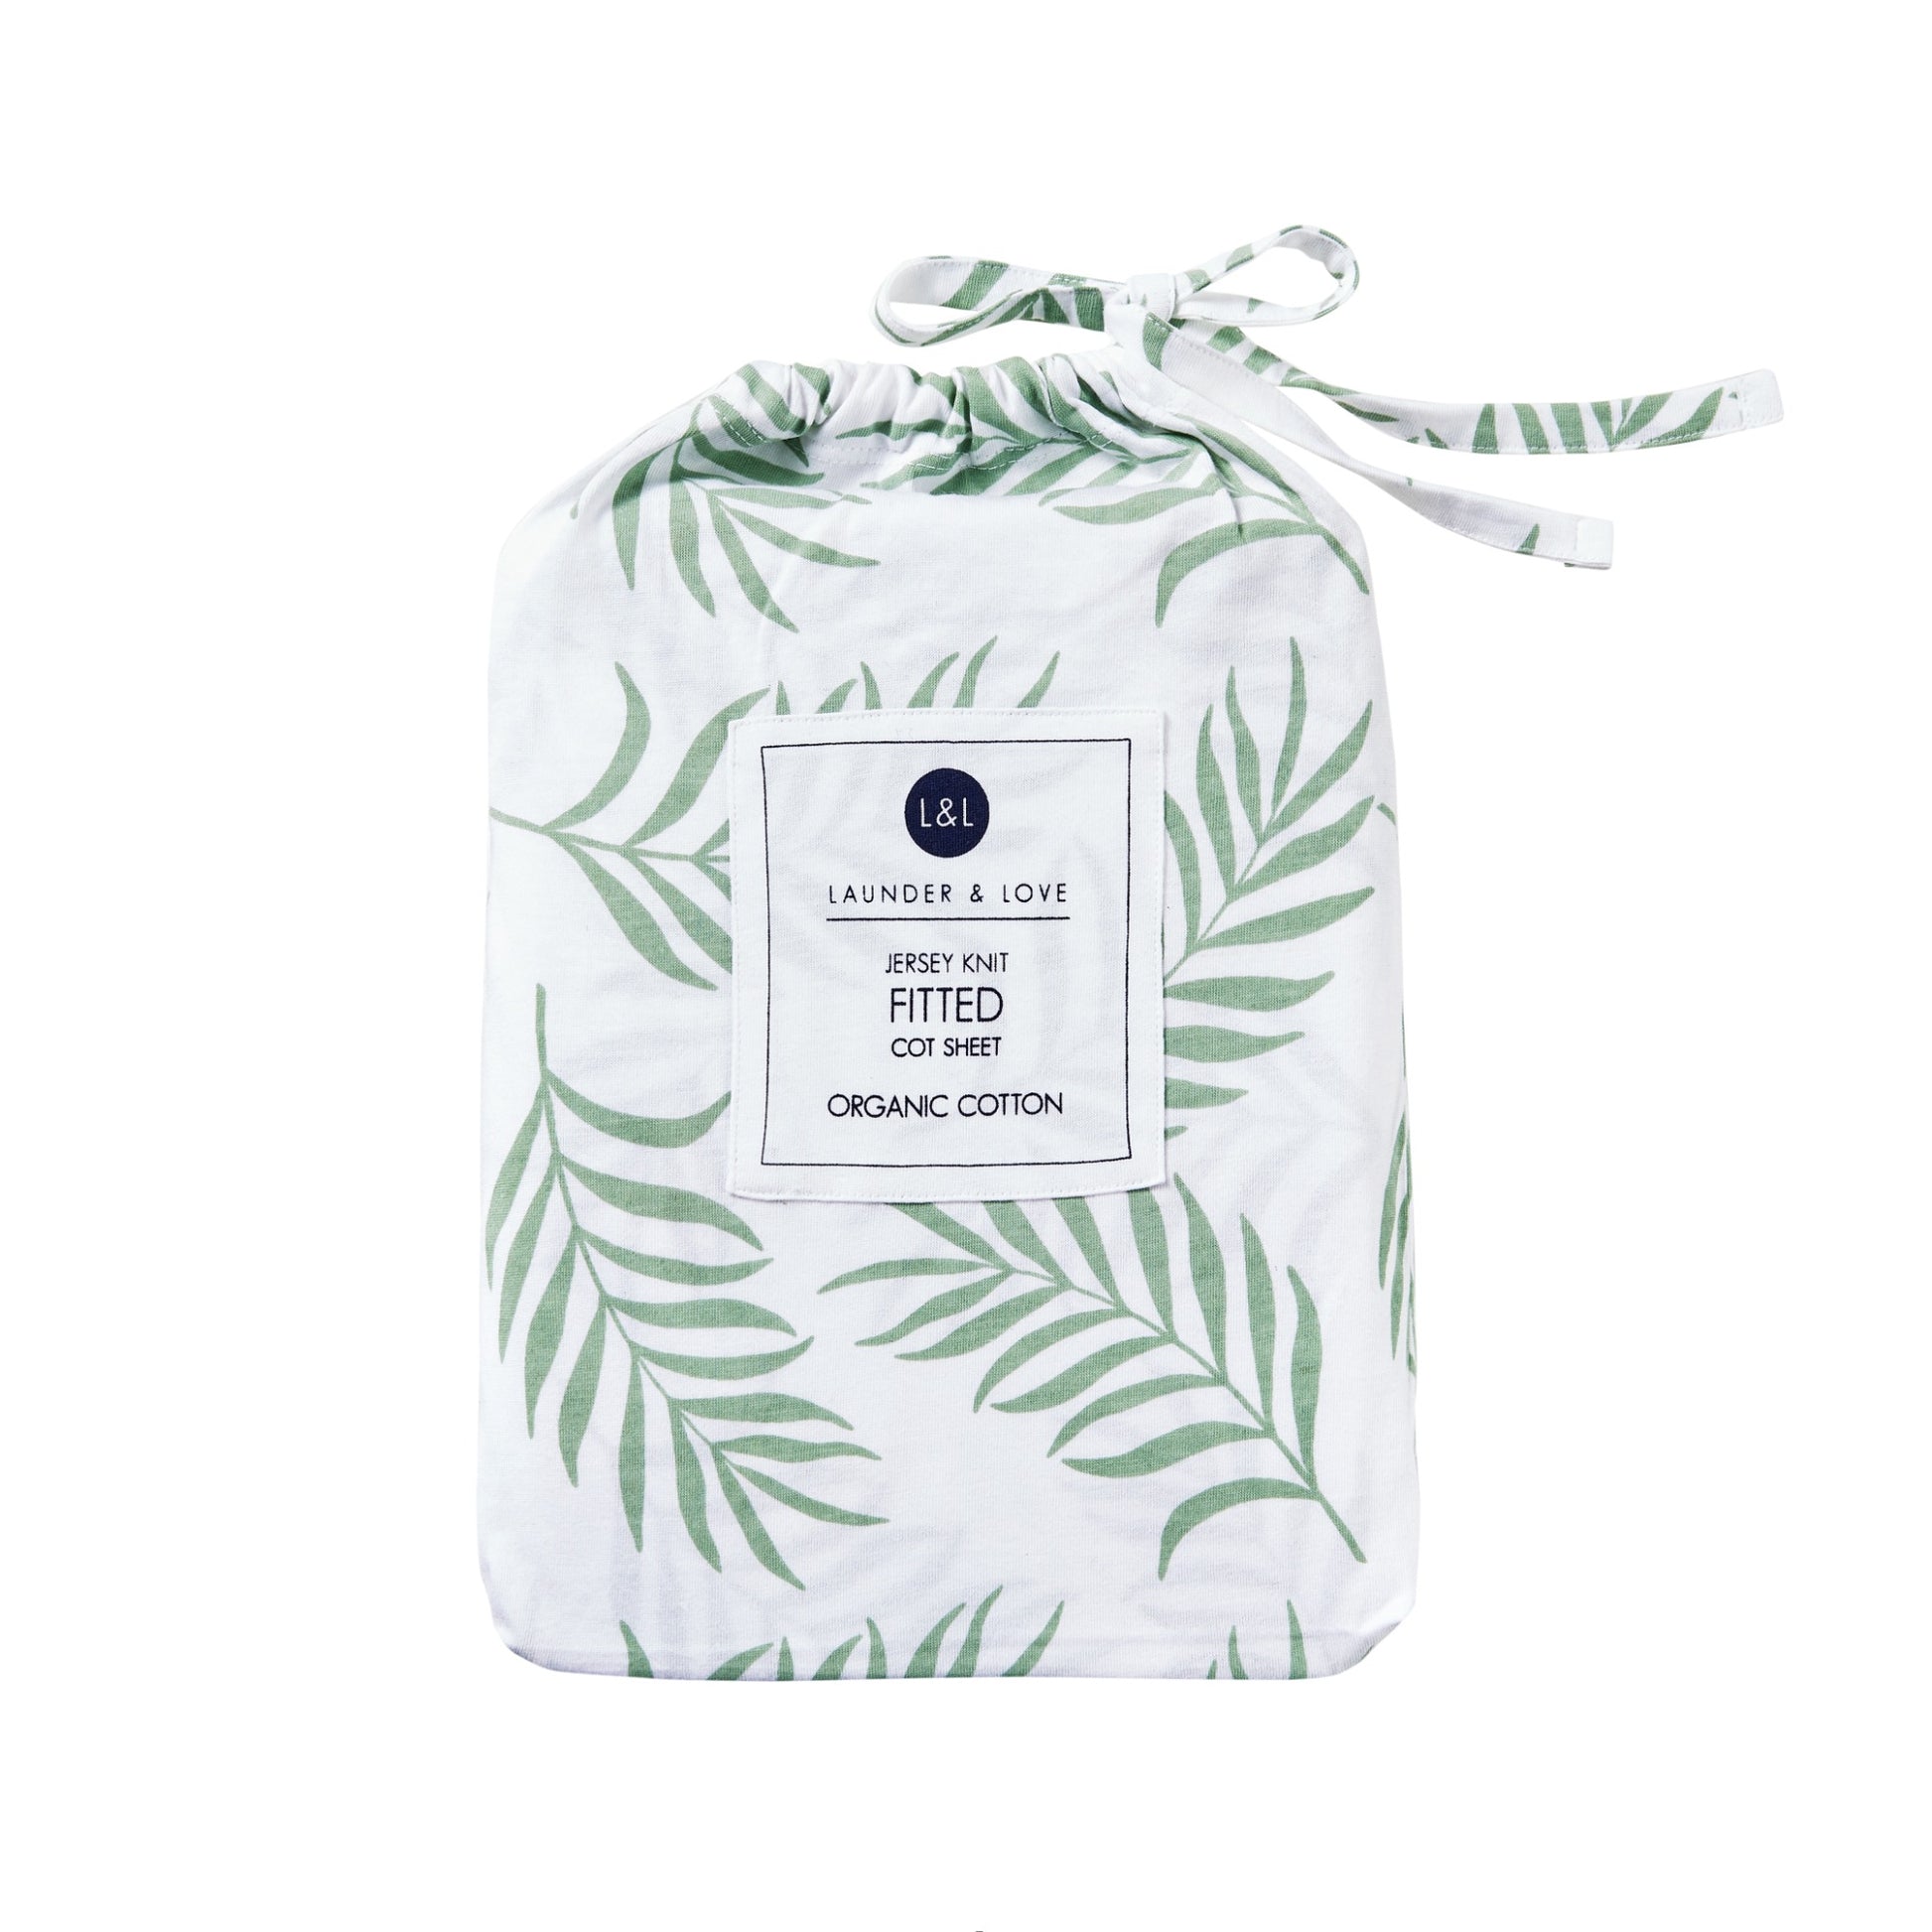 Launder & Love Fitted Cot Sheet in Leaf available at Bear & Moo